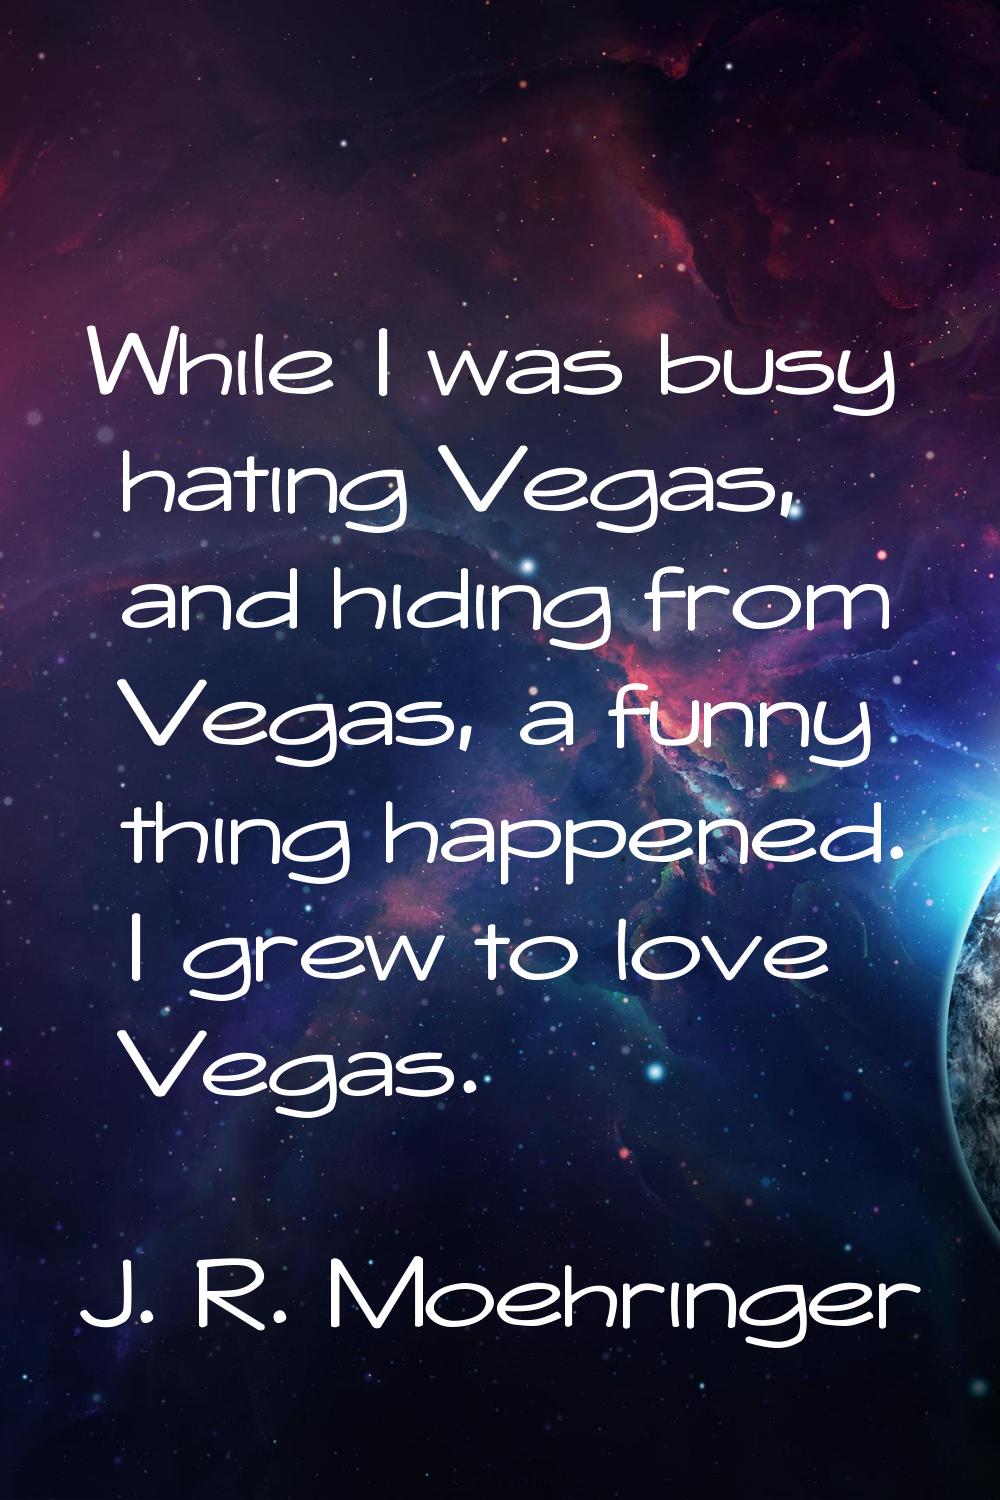 While I was busy hating Vegas, and hiding from Vegas, a funny thing happened. I grew to love Vegas.